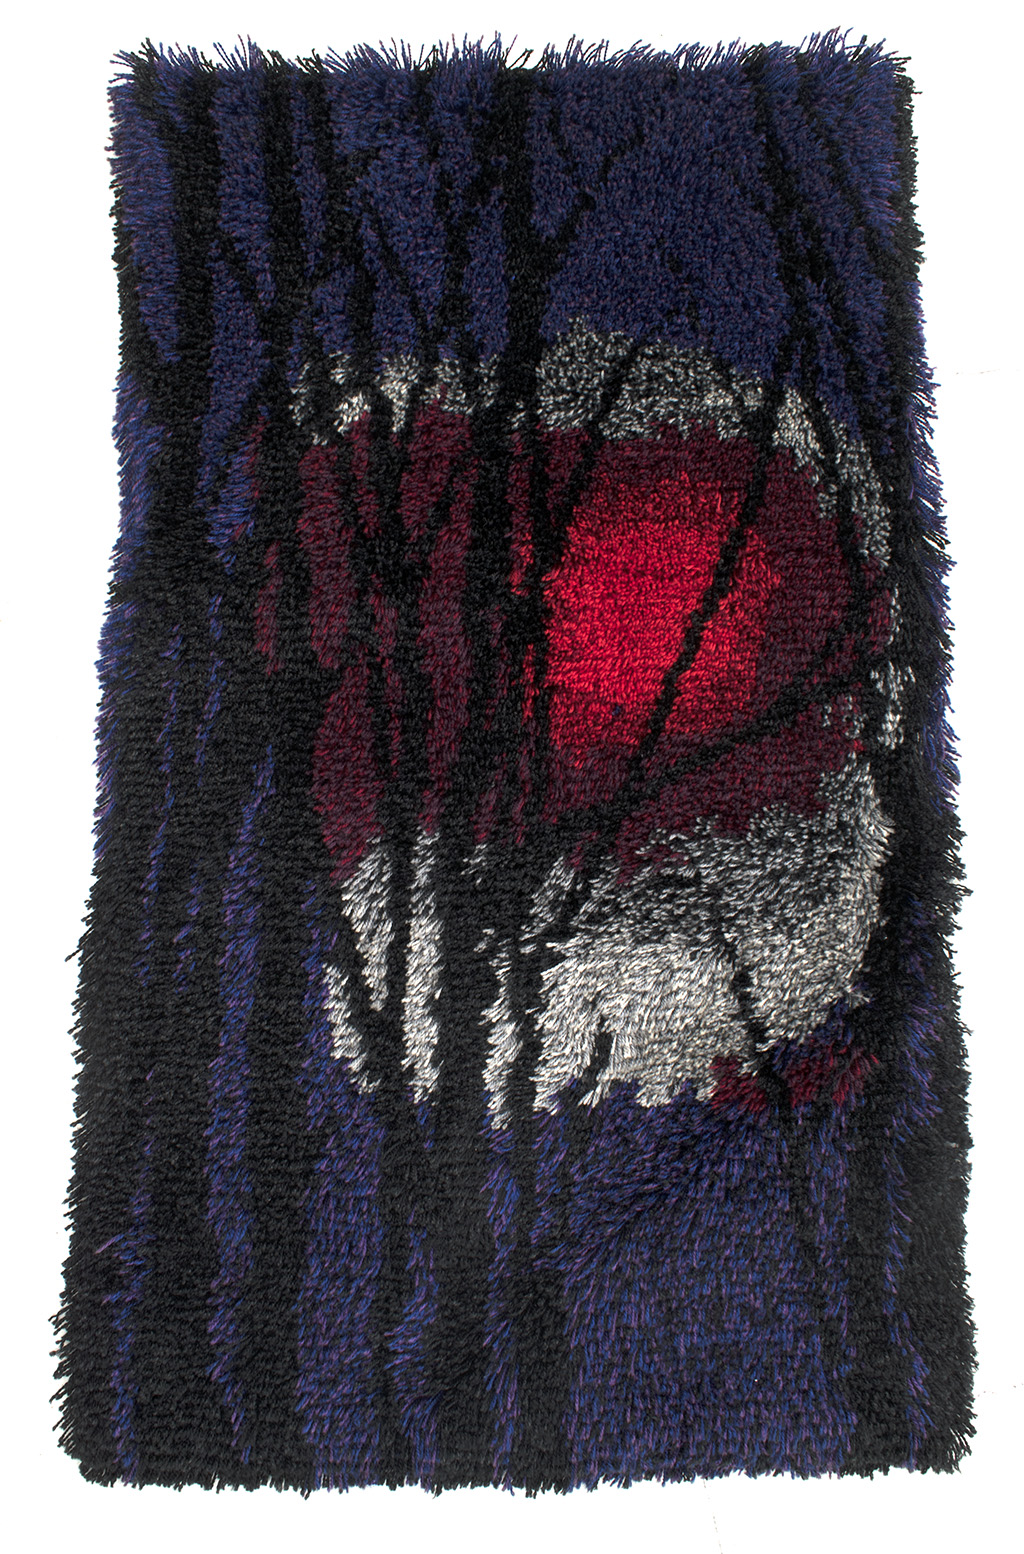 Rug with branches